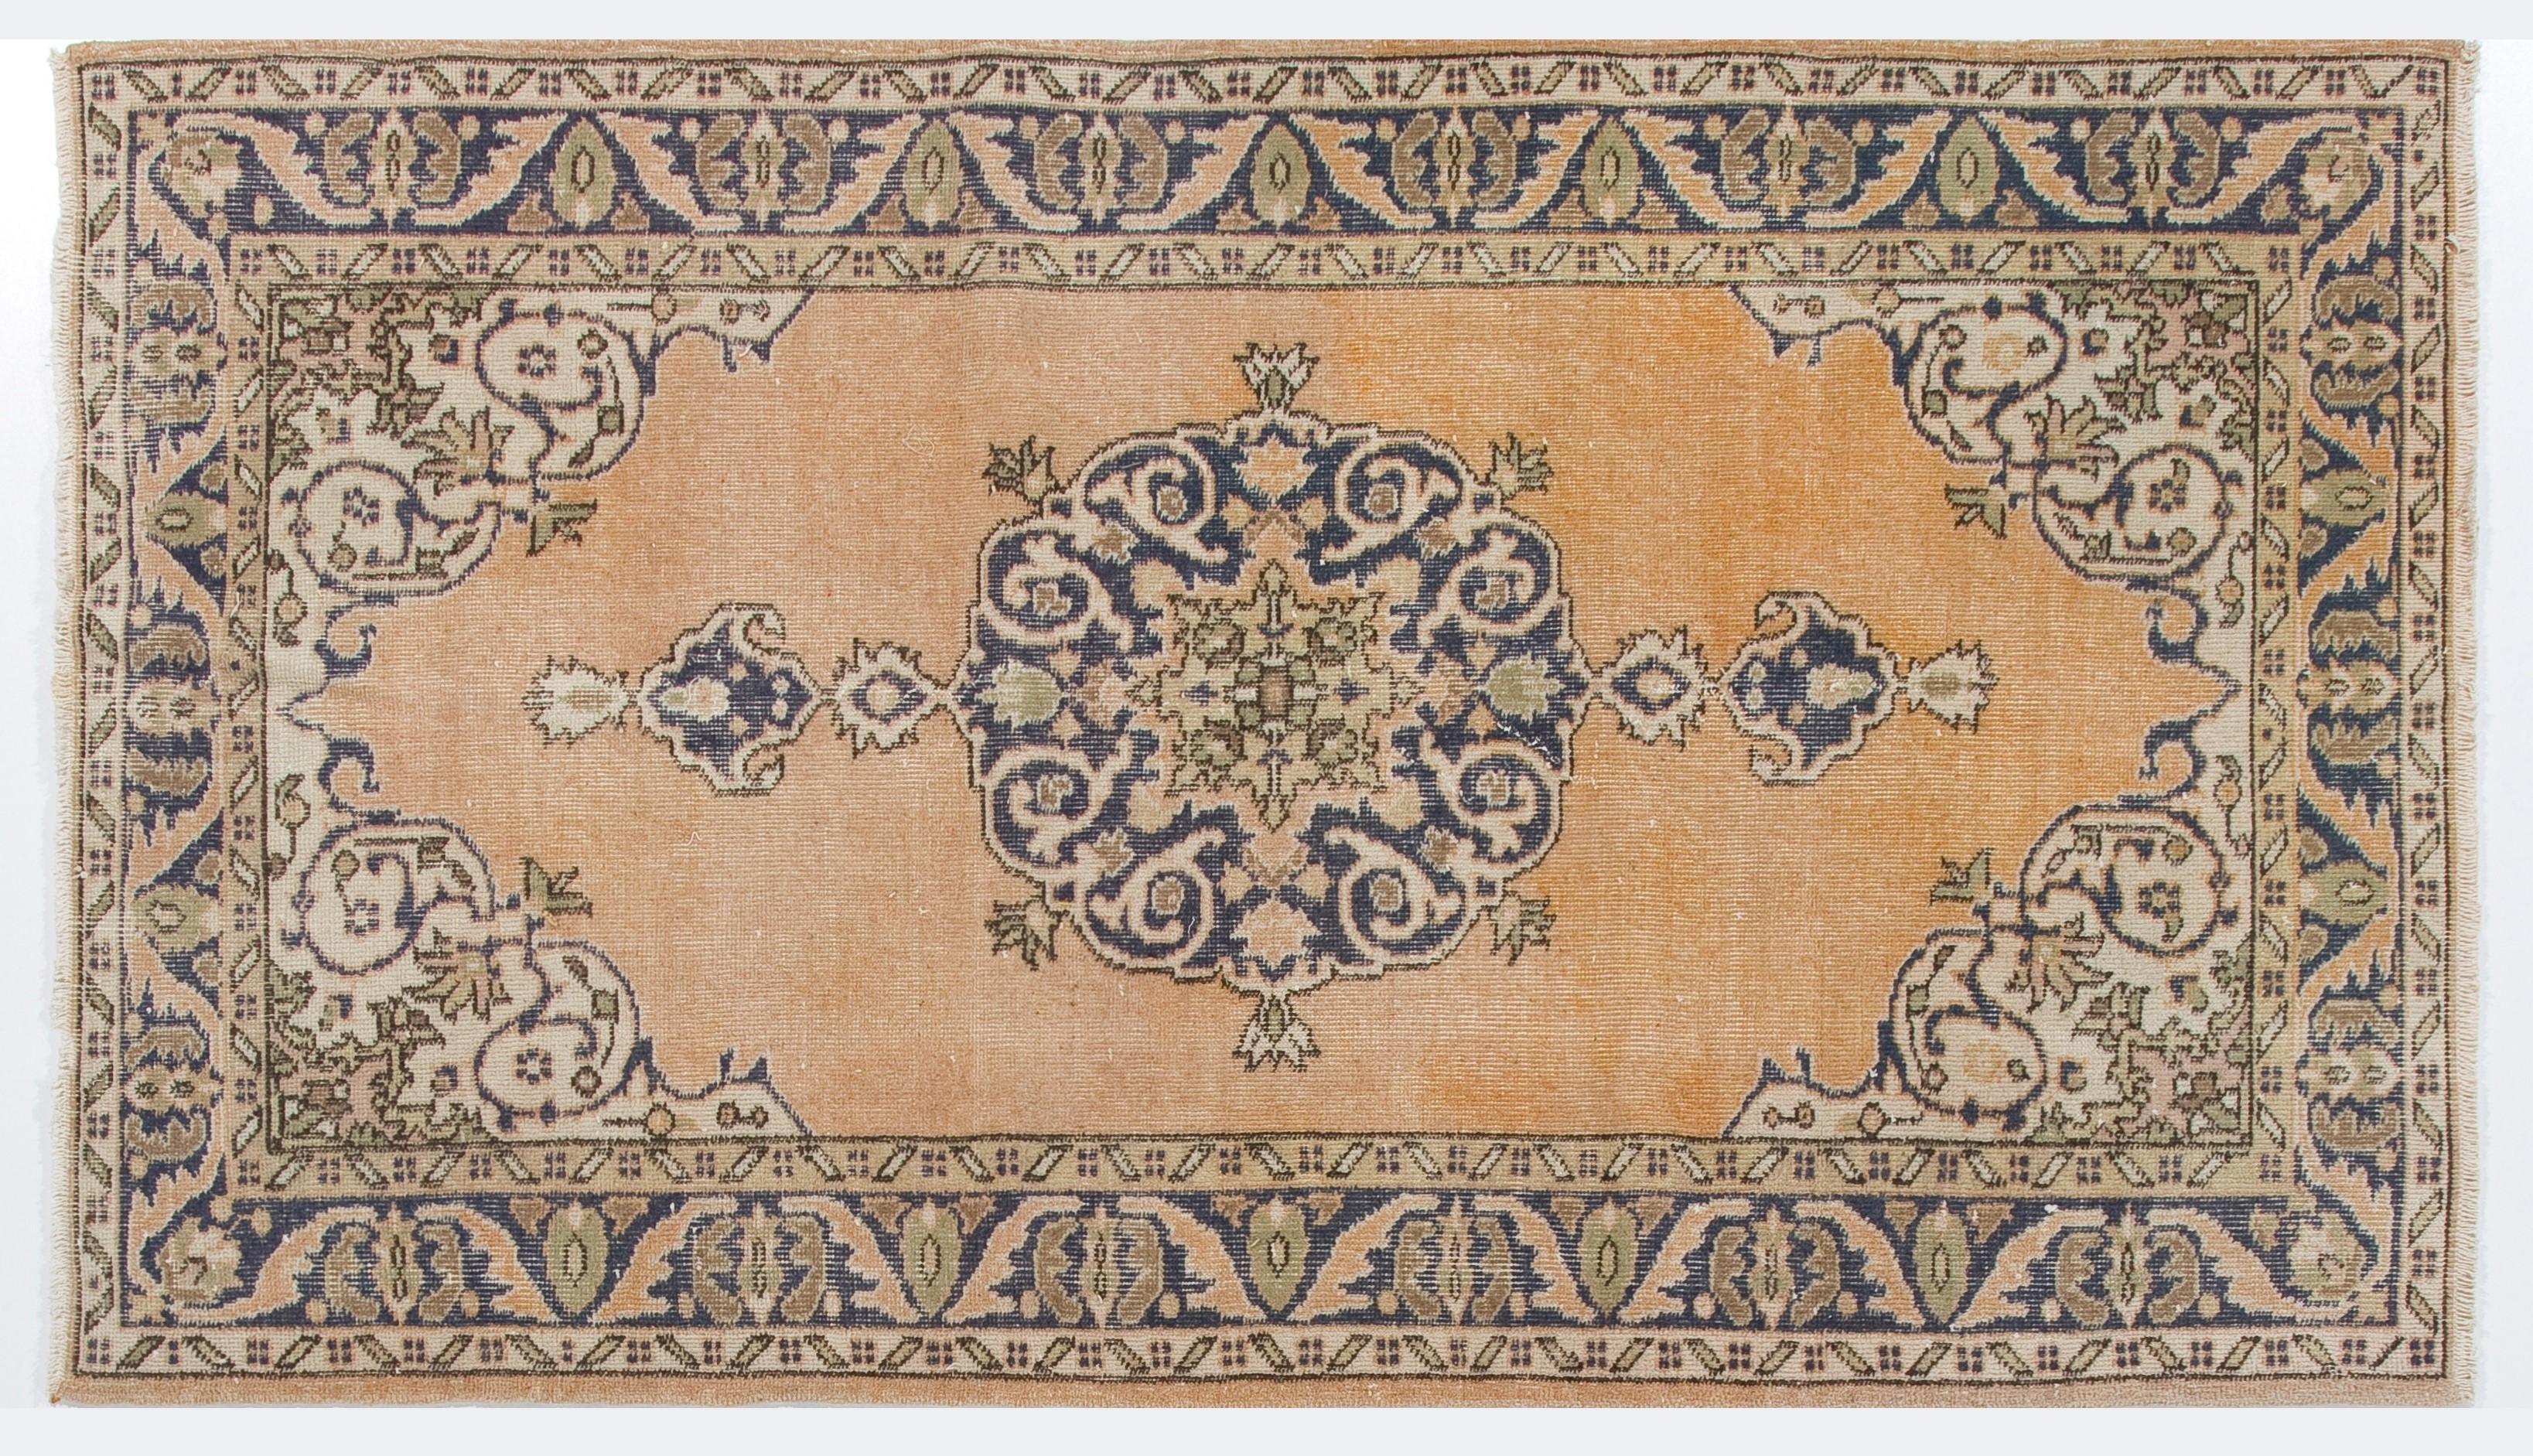 A vintage Turkish Oushak area rug with a central tear-drop medallion in dark indigo blue against a plain field in faded peach with arabesque corner-pieces. The rug is finely hand-knotted and has low wool pile on cotton foundation. It is deep-washed,